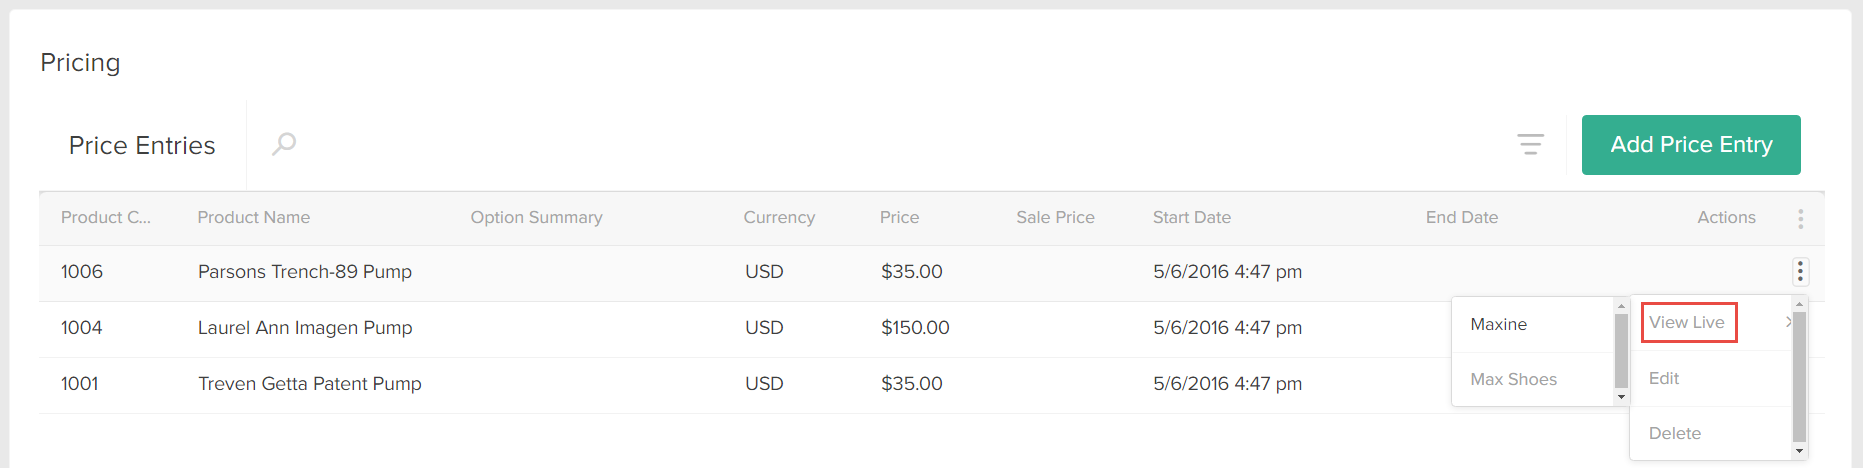 The Pricing configuration section with a callout for the view Live option in the drop-down actions menu